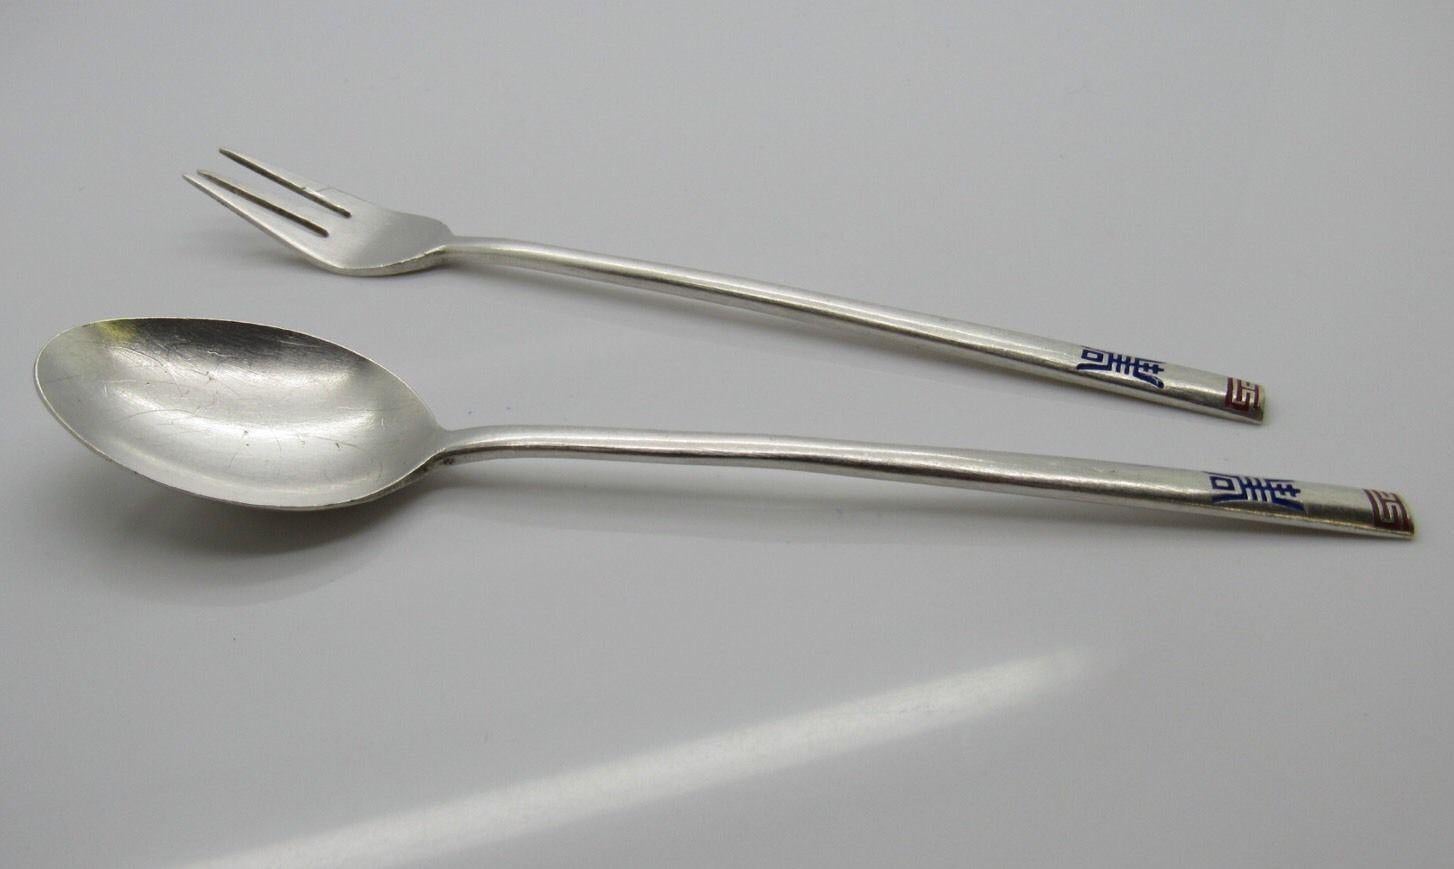 korean spoon and fork